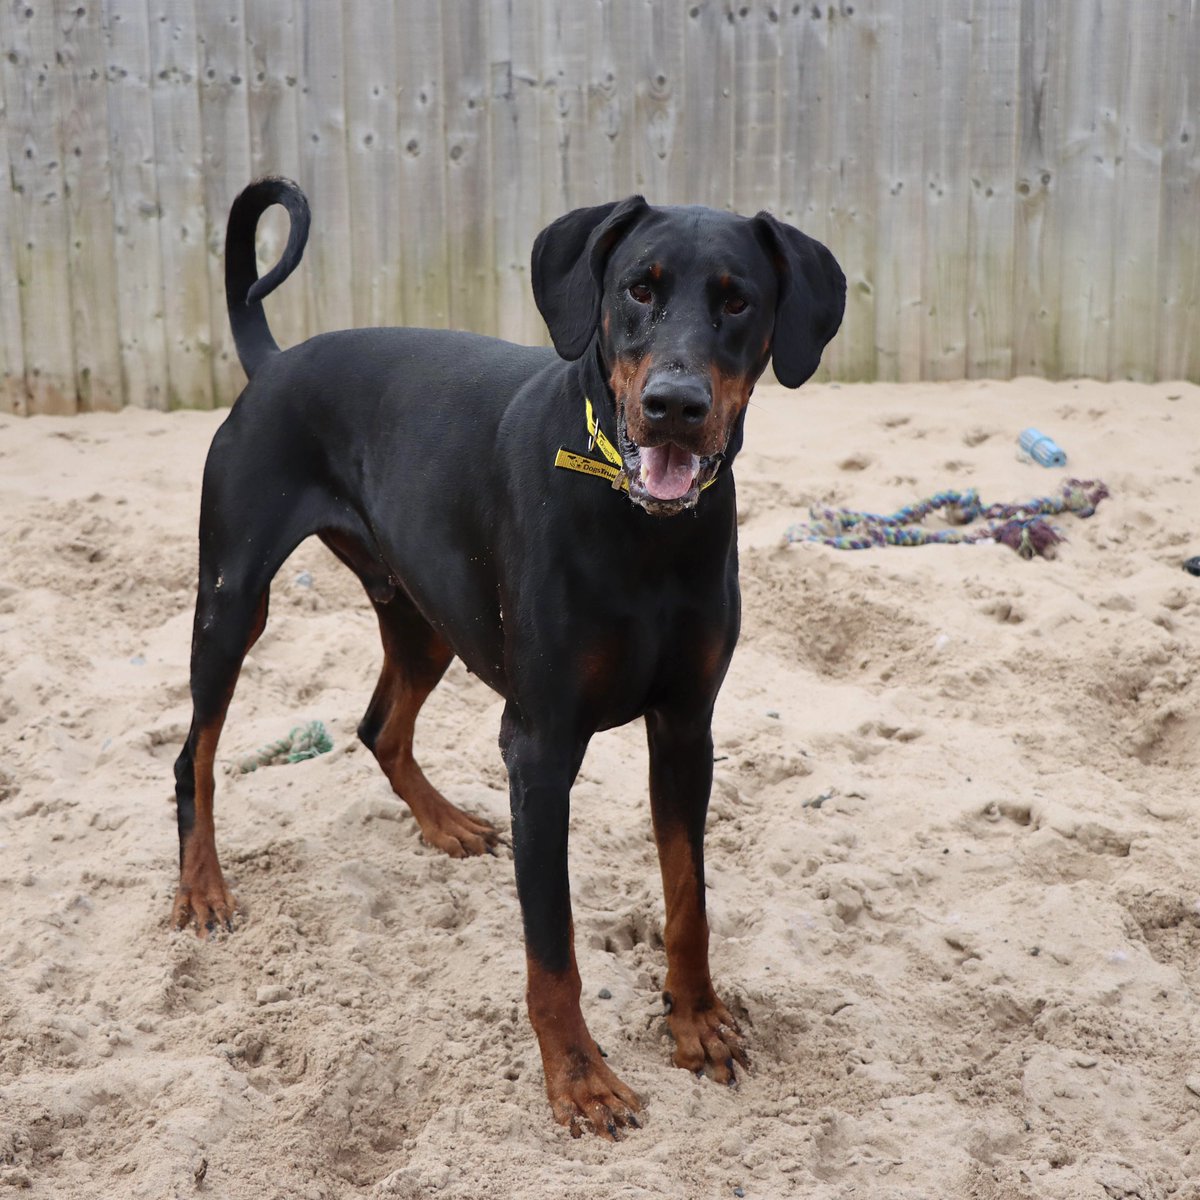 😍 We. Are. In. LOVE! 😍

Zeus is an amazing big lad who has so much love to give! He’s had a great time playing in the sand followed by plenty of snuggles.

@DogsTrust 
#DogsTrust #DogsTrustDarlington #AdoptDontShop #MidweekBoost #HappyWednesday #HandsomeBoy